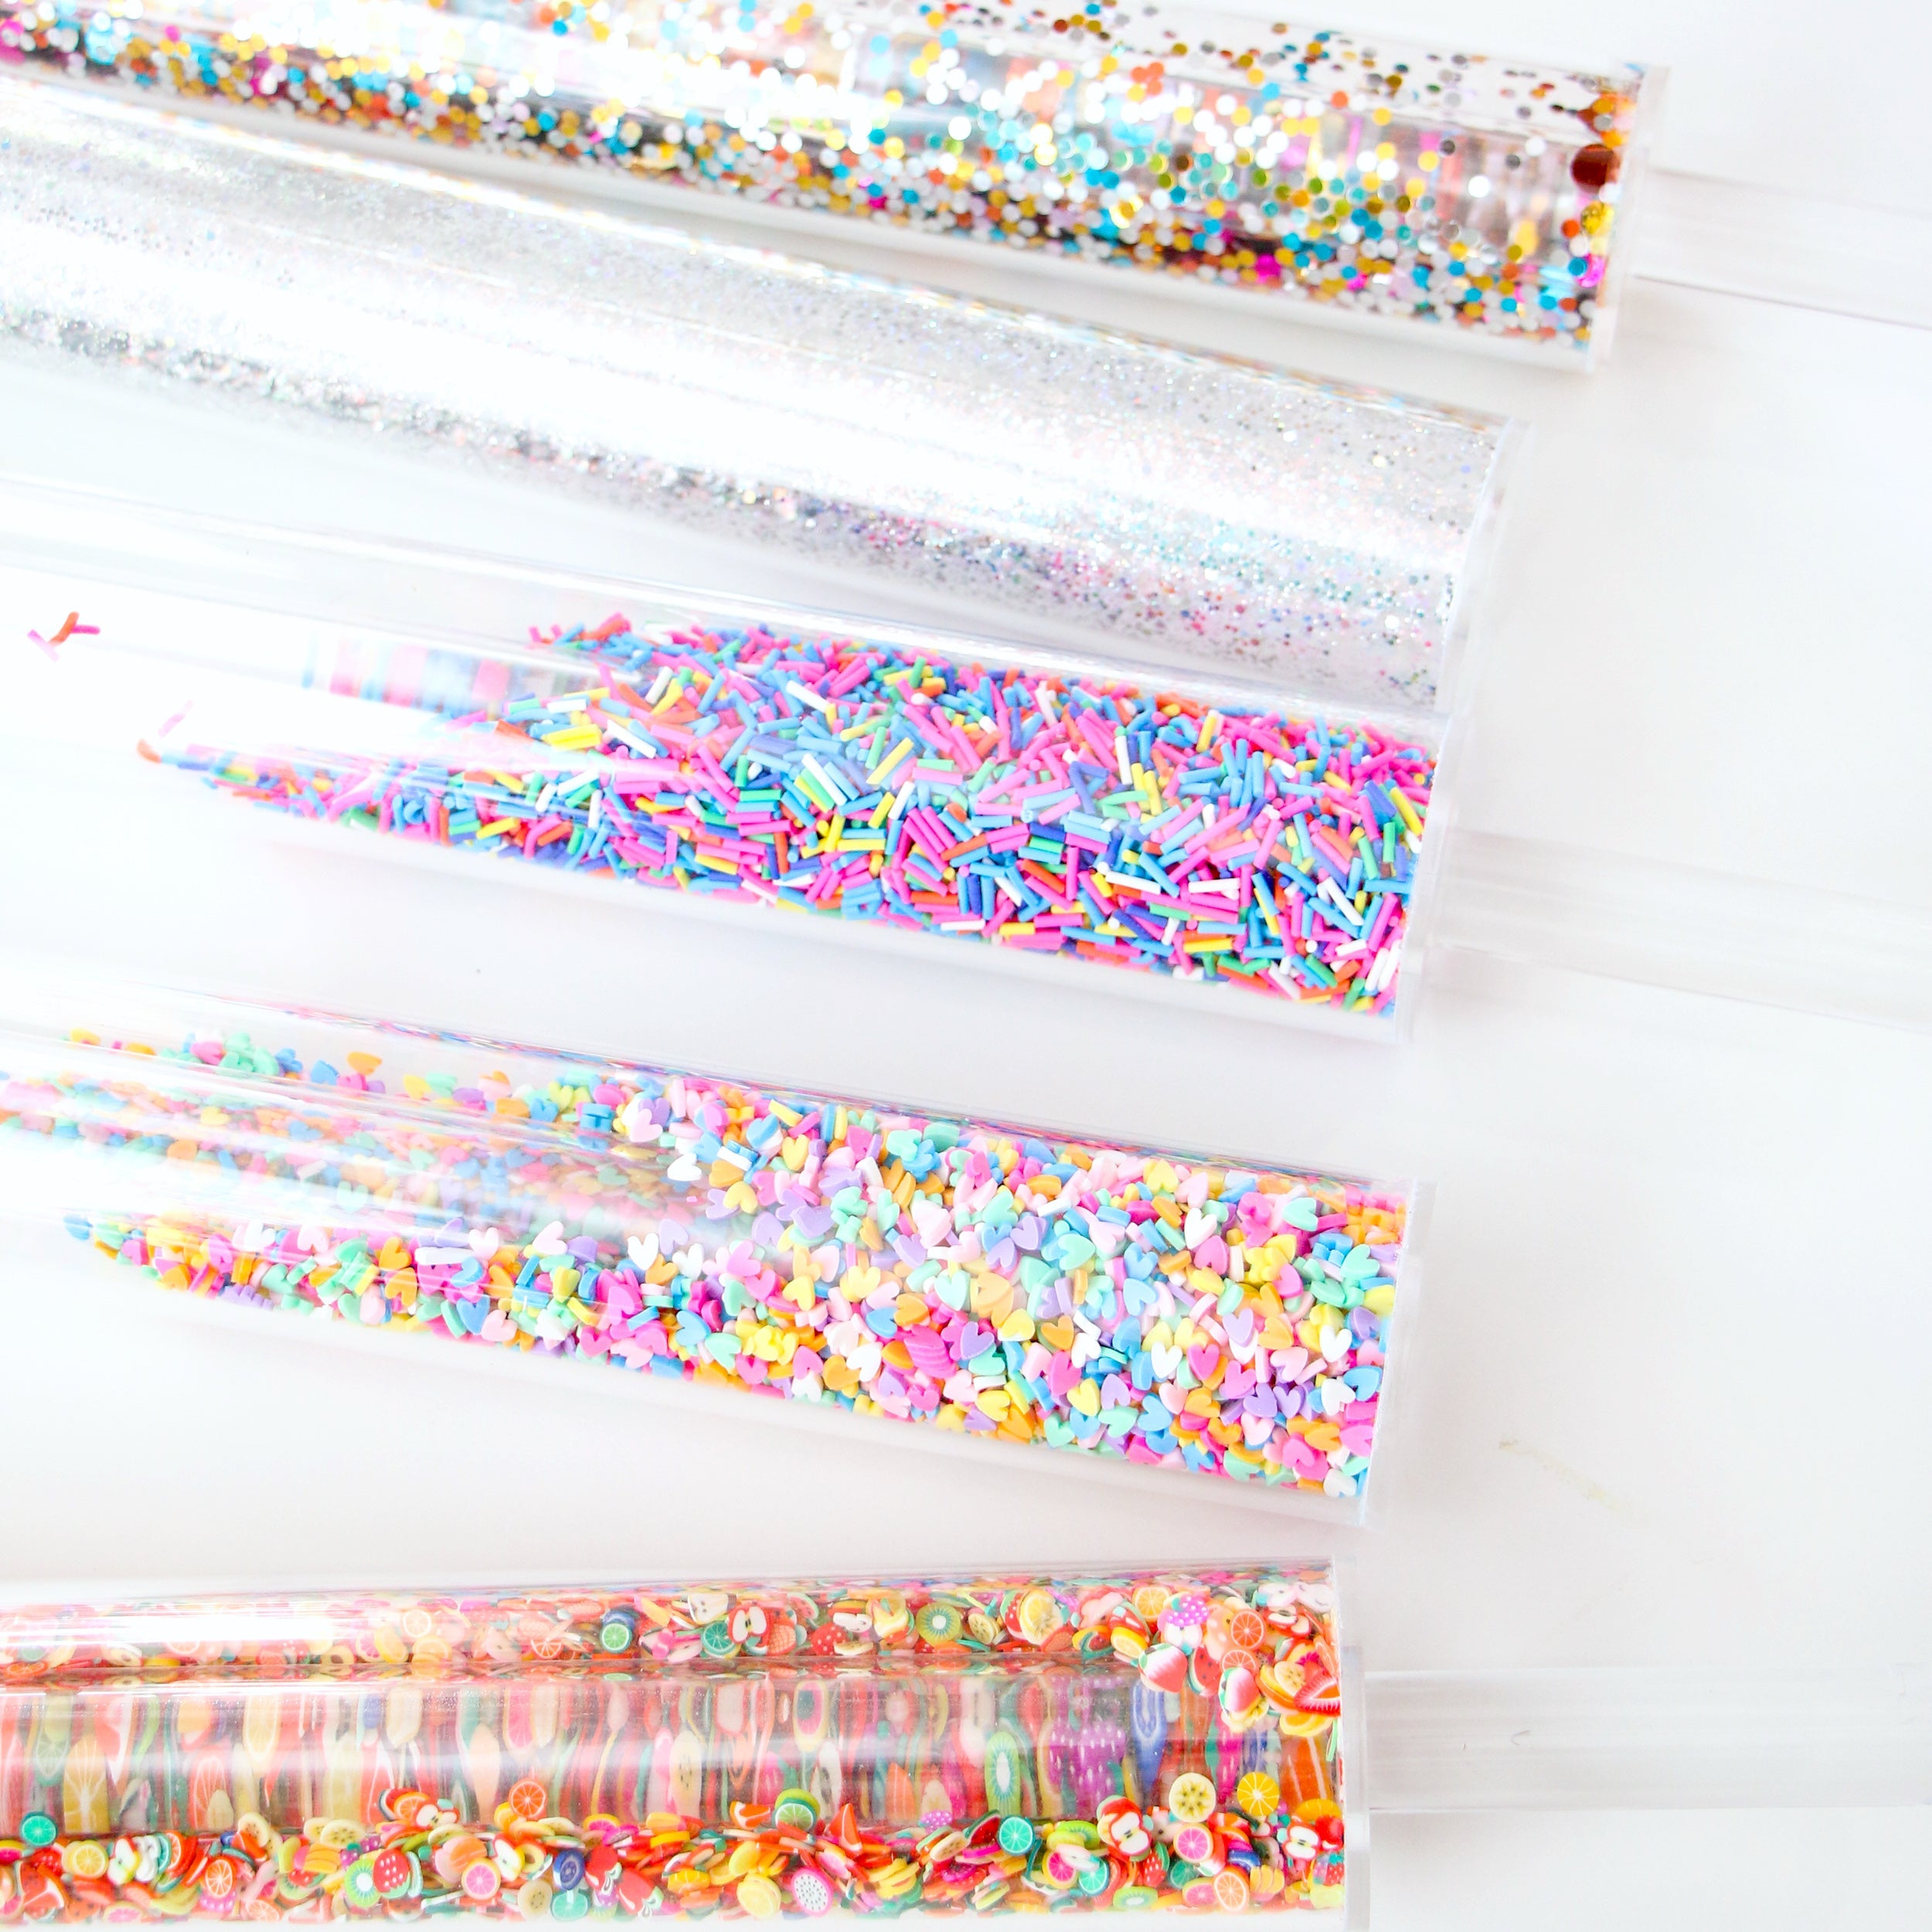 Acrylic confetti and sprinkle filled rolling pin by Kailo Chic